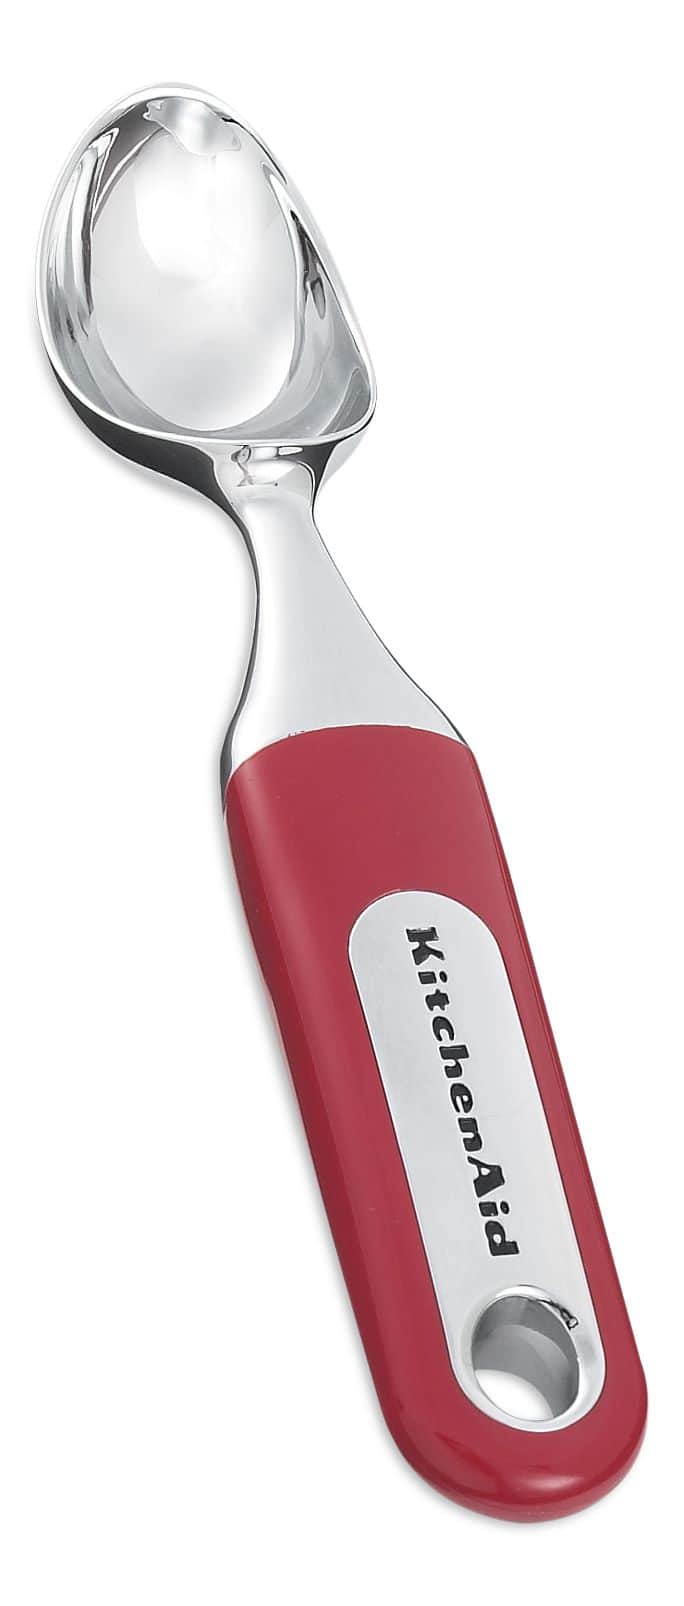 https://media-www.canadiantire.ca/product/living/kitchen/kitchen-tools-thermometers/0422813/kitchen-aid-red-ice-cream-scoop-45e3ee6a-01d8-4e73-be07-dee34248d5d2-jpgrendition.jpg